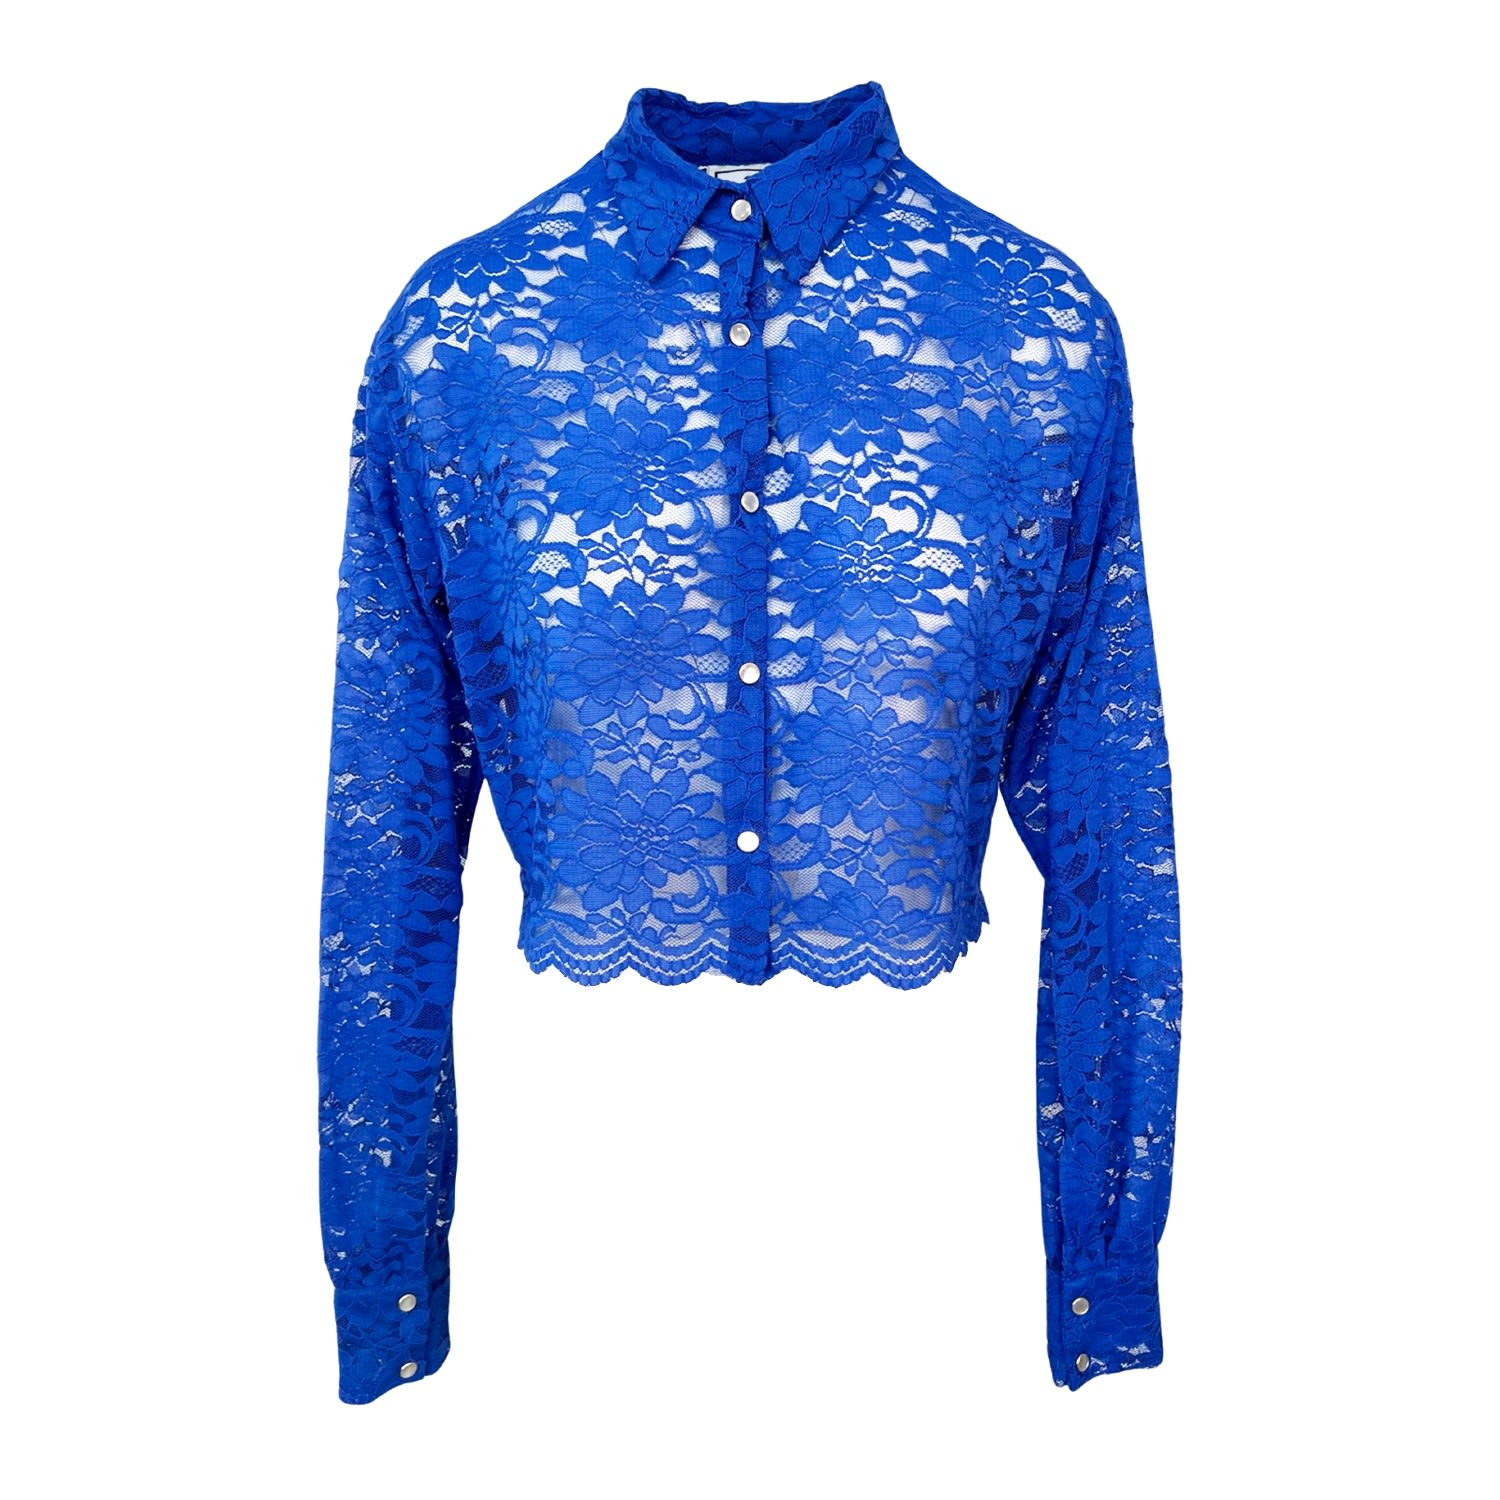 L2r The Label Women's Cropped Shirt - Stretchy Blue Lace